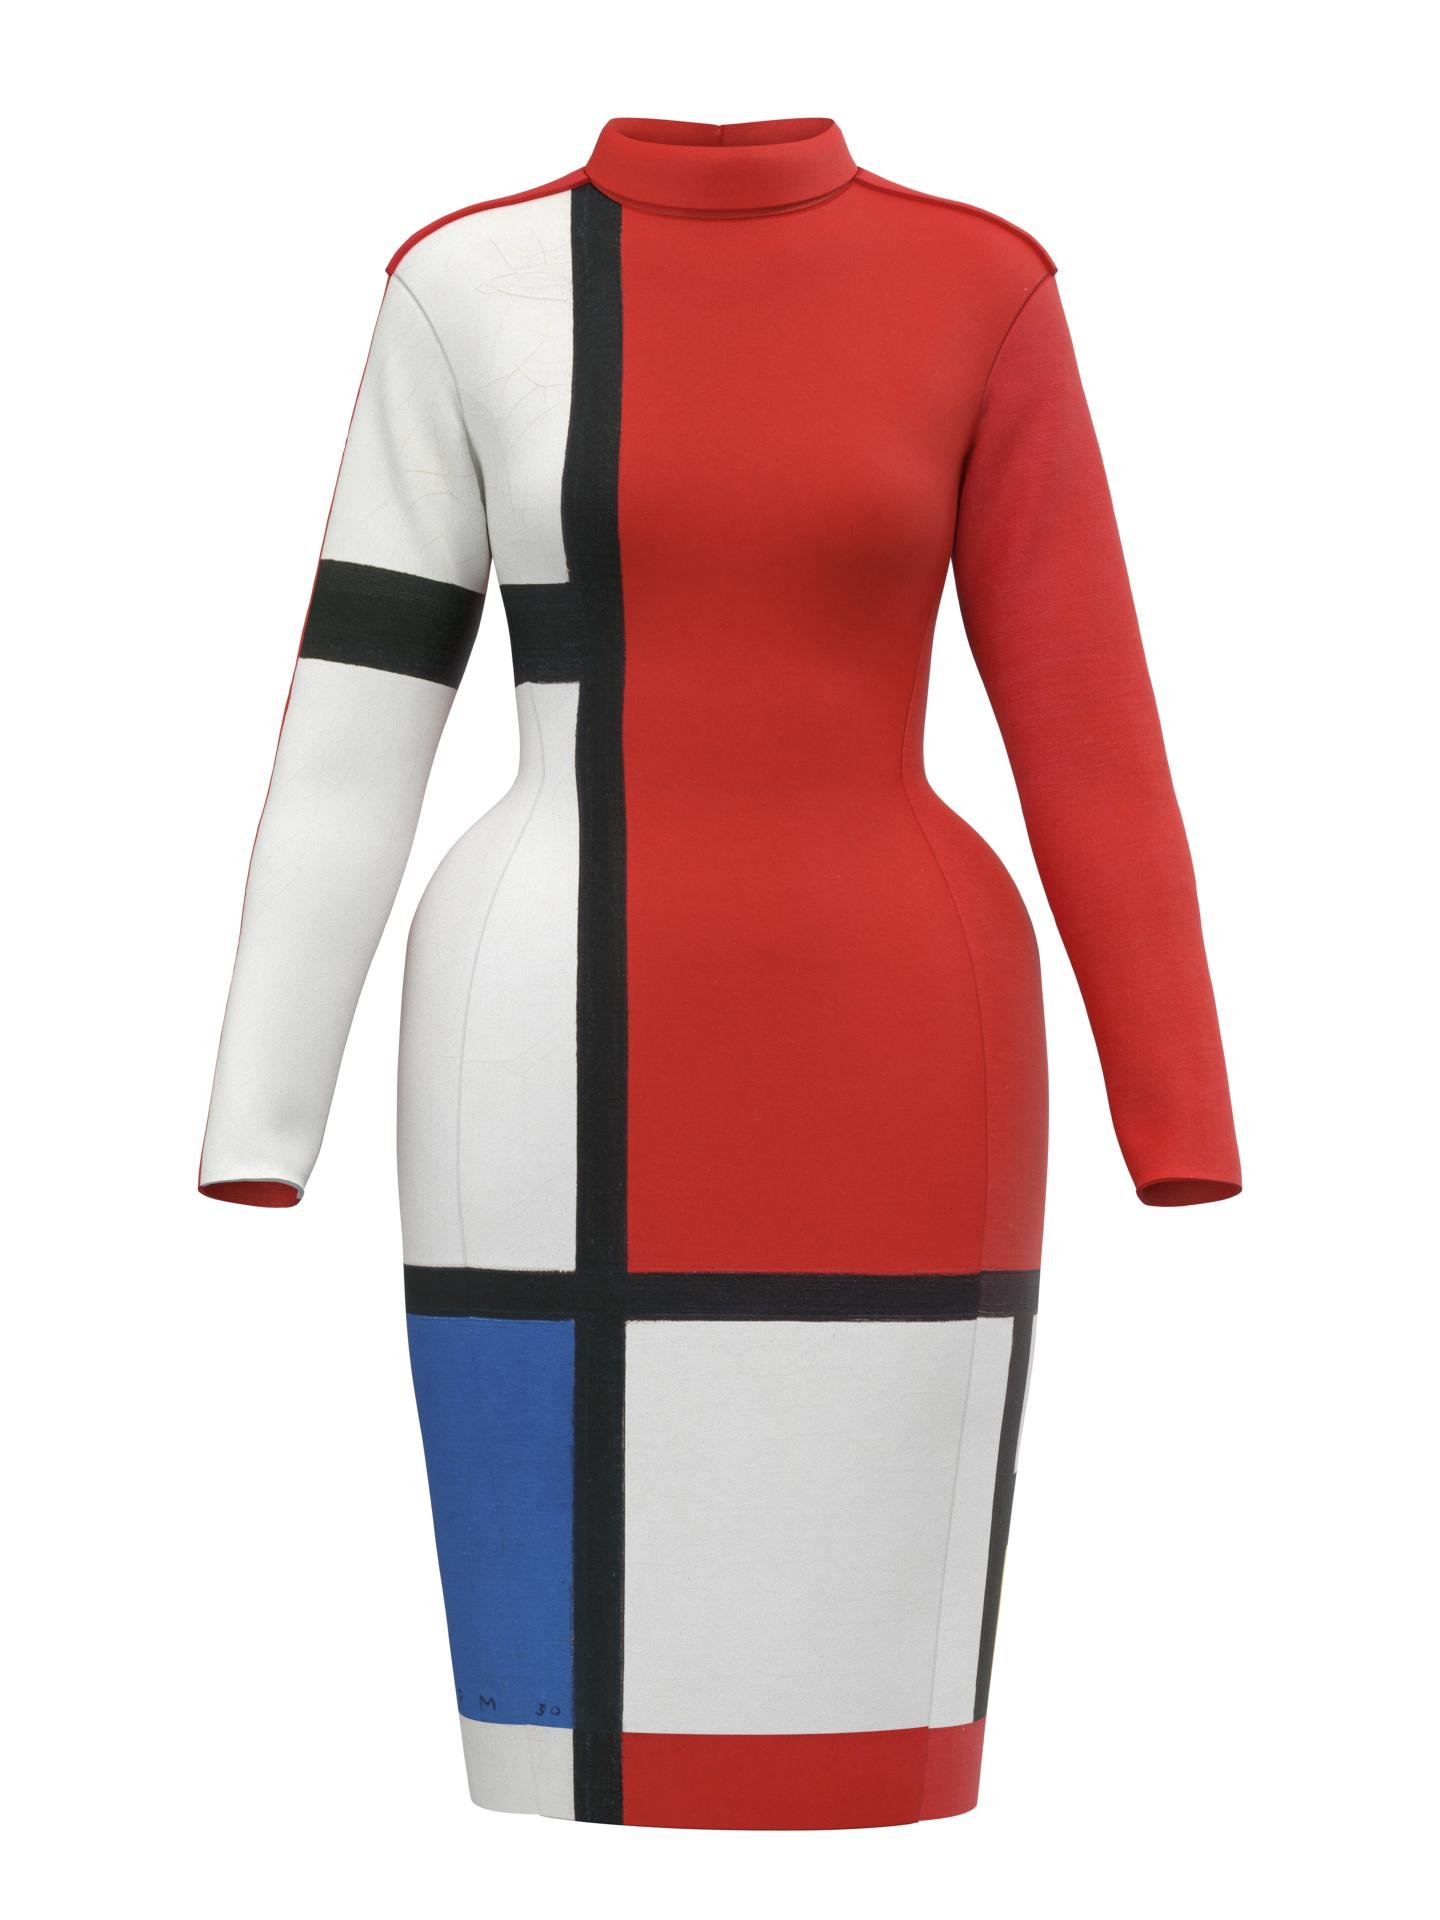 Space Dress-Composition with Red, Blue and Yellow by DRESSX